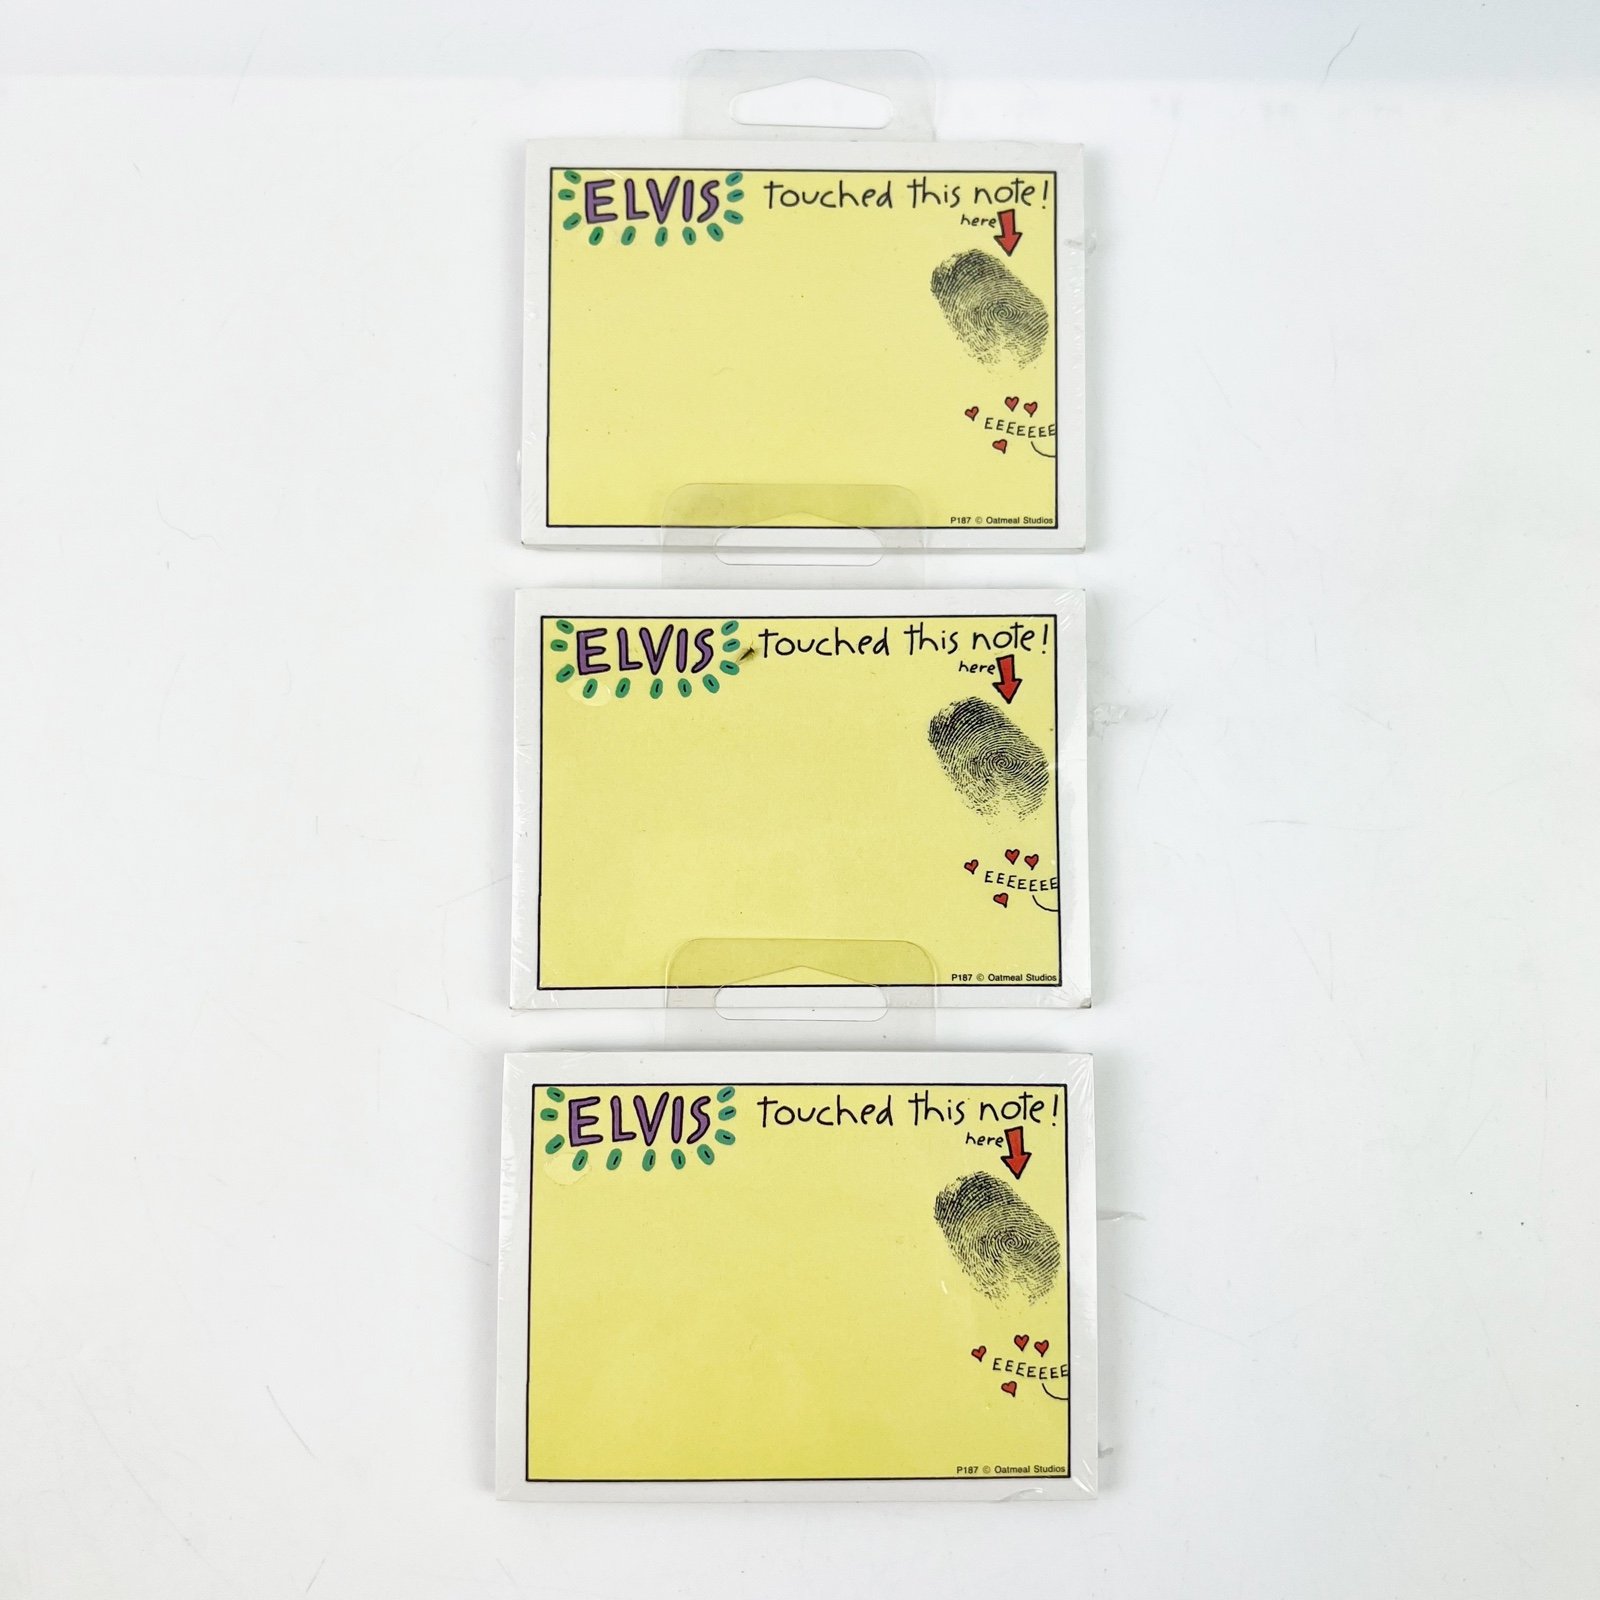 NEW 3 Vintage Post-it Note Pads 3M “Elvis Touched This 